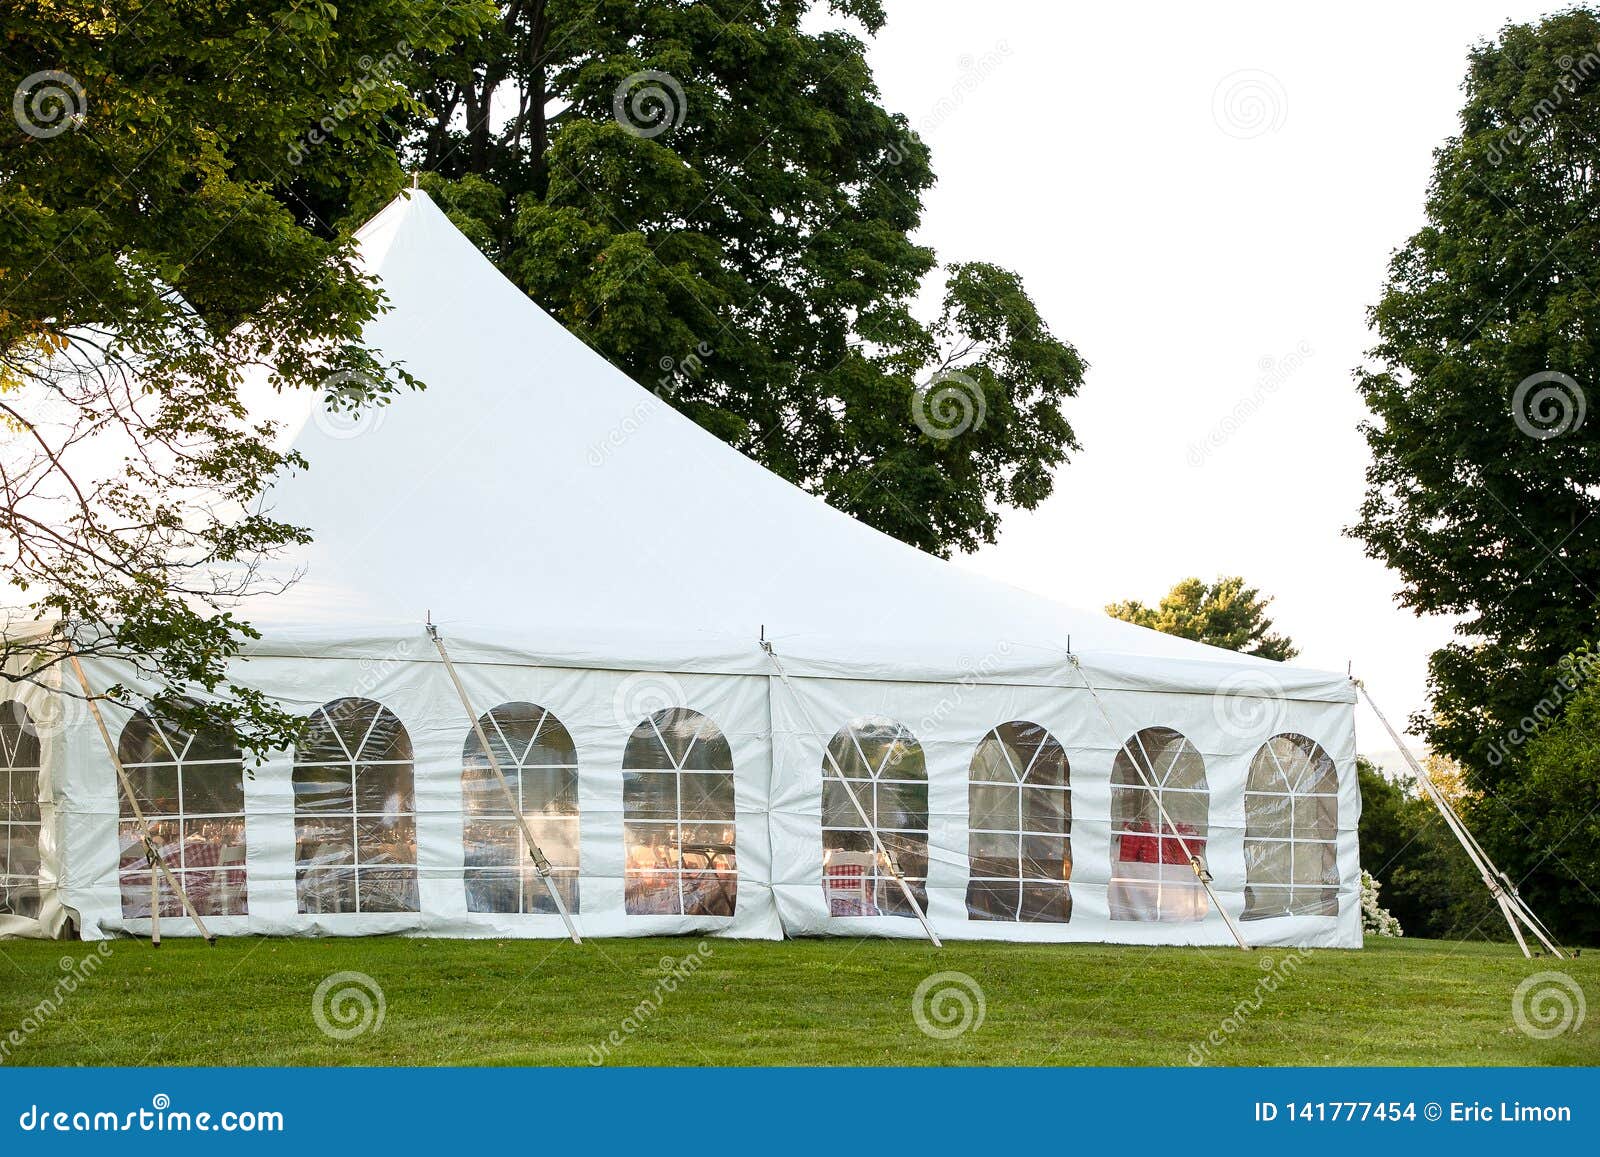 a white wedding tent set up in a lawn surrounded by trees and with the sides down